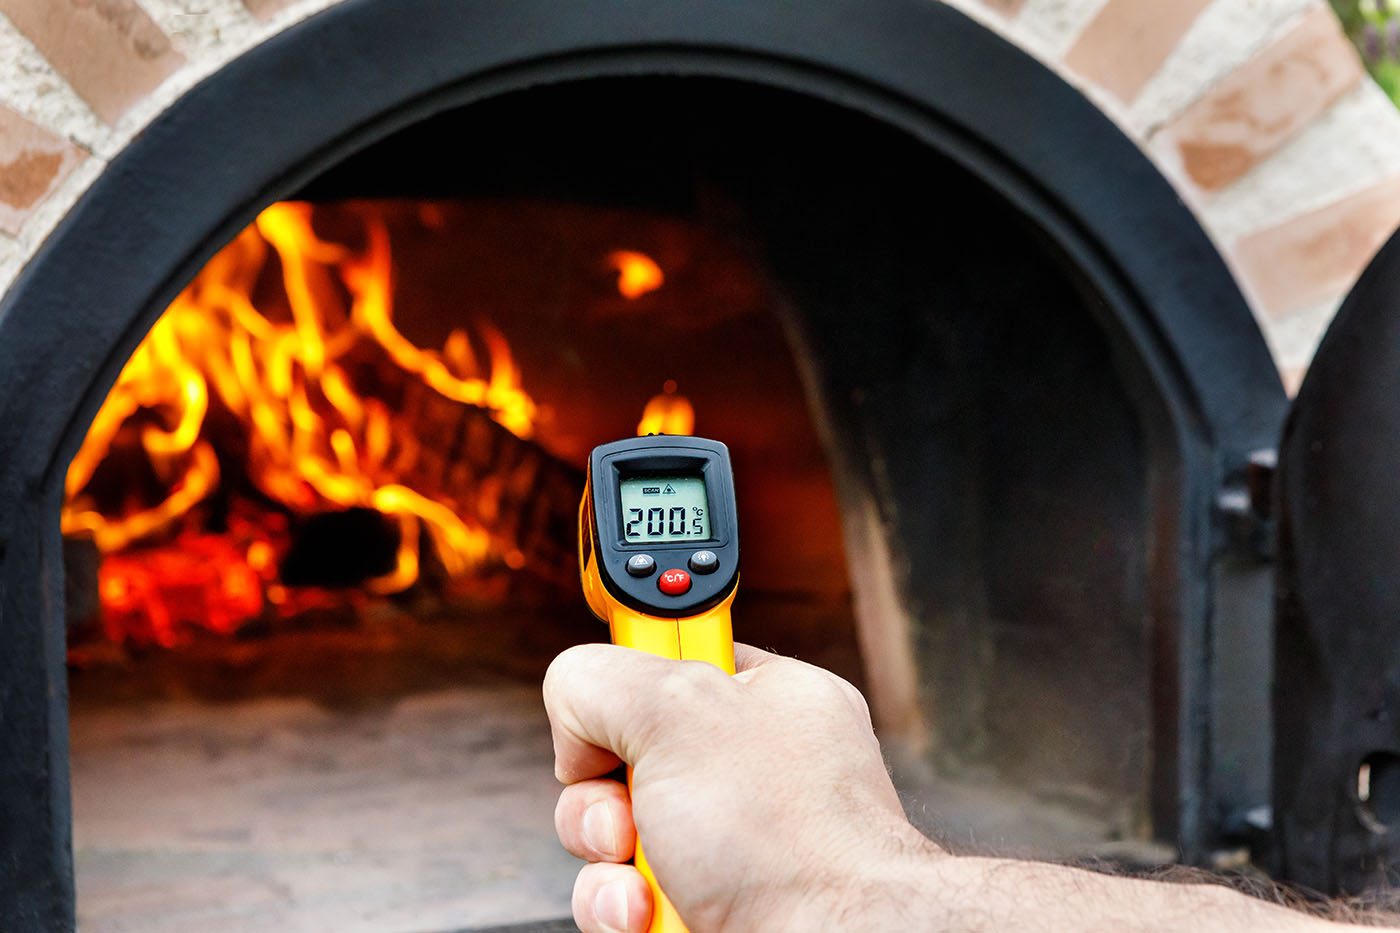 https://www.fuegowoodfiredovens.com/wp-content/uploads/2018/08/how-to-light-your-wood-fired-pizza-oven-6.jpg